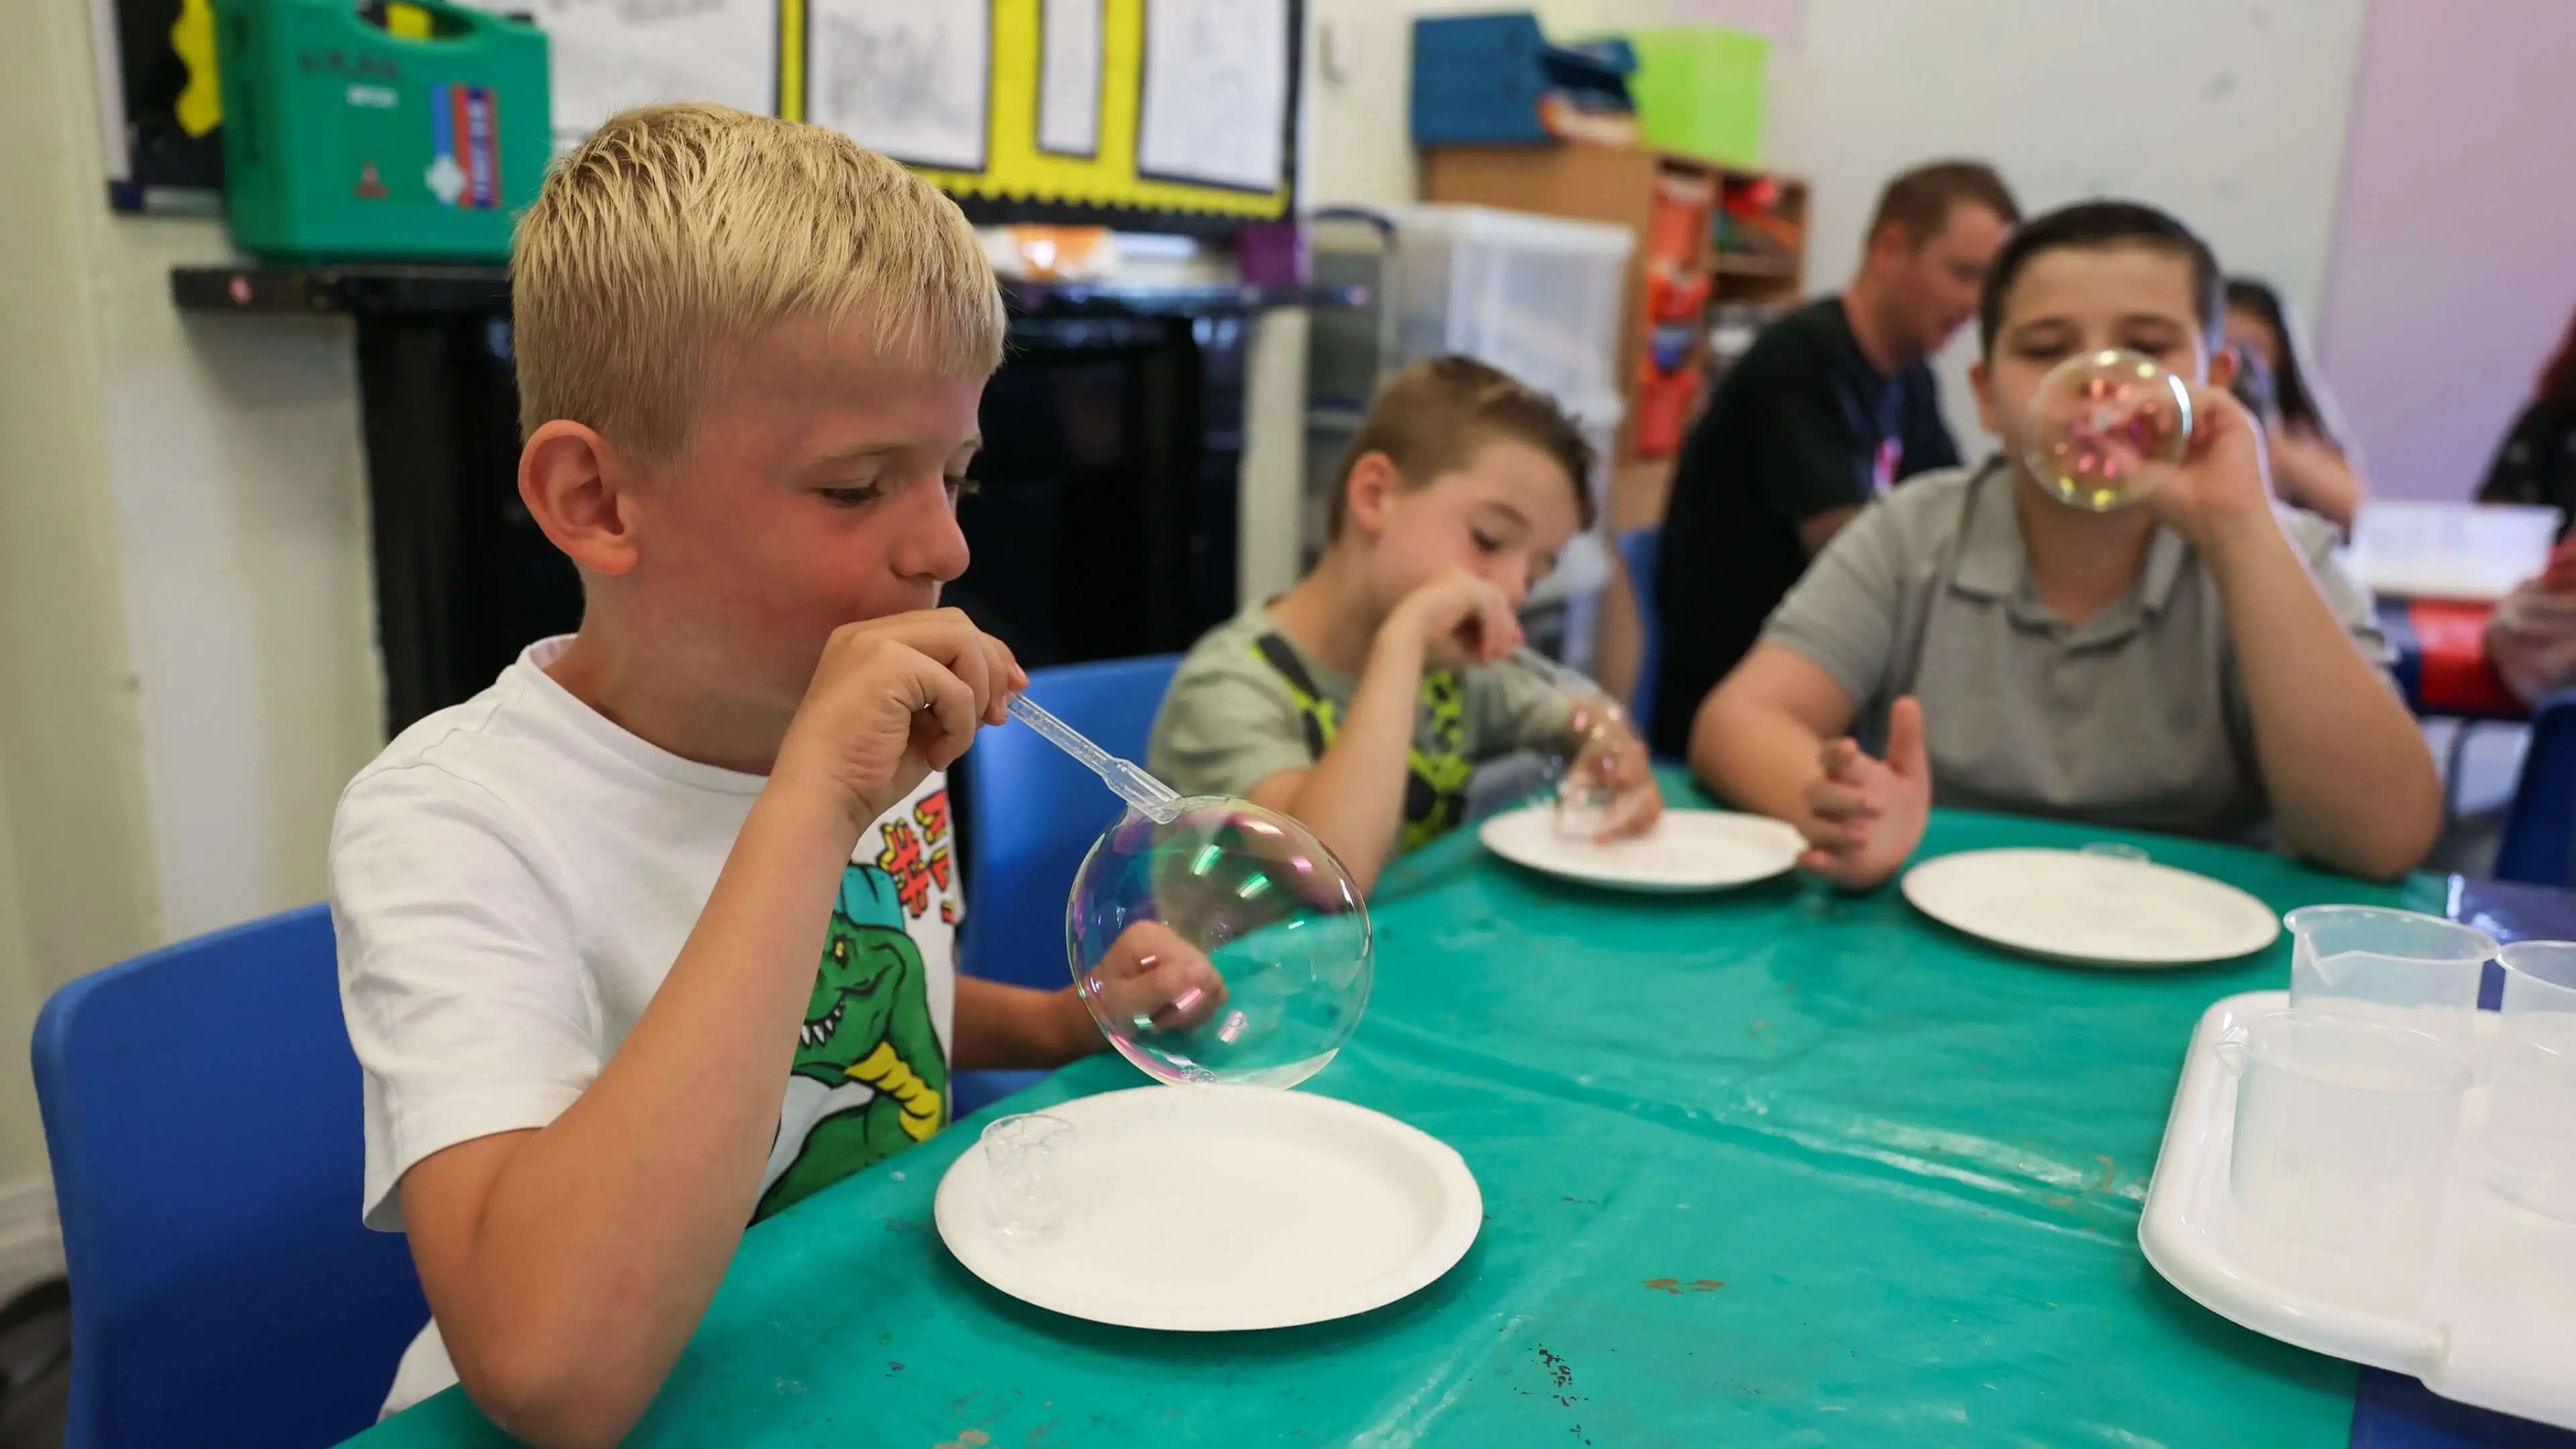 Children blowing bubbles during a science experiment